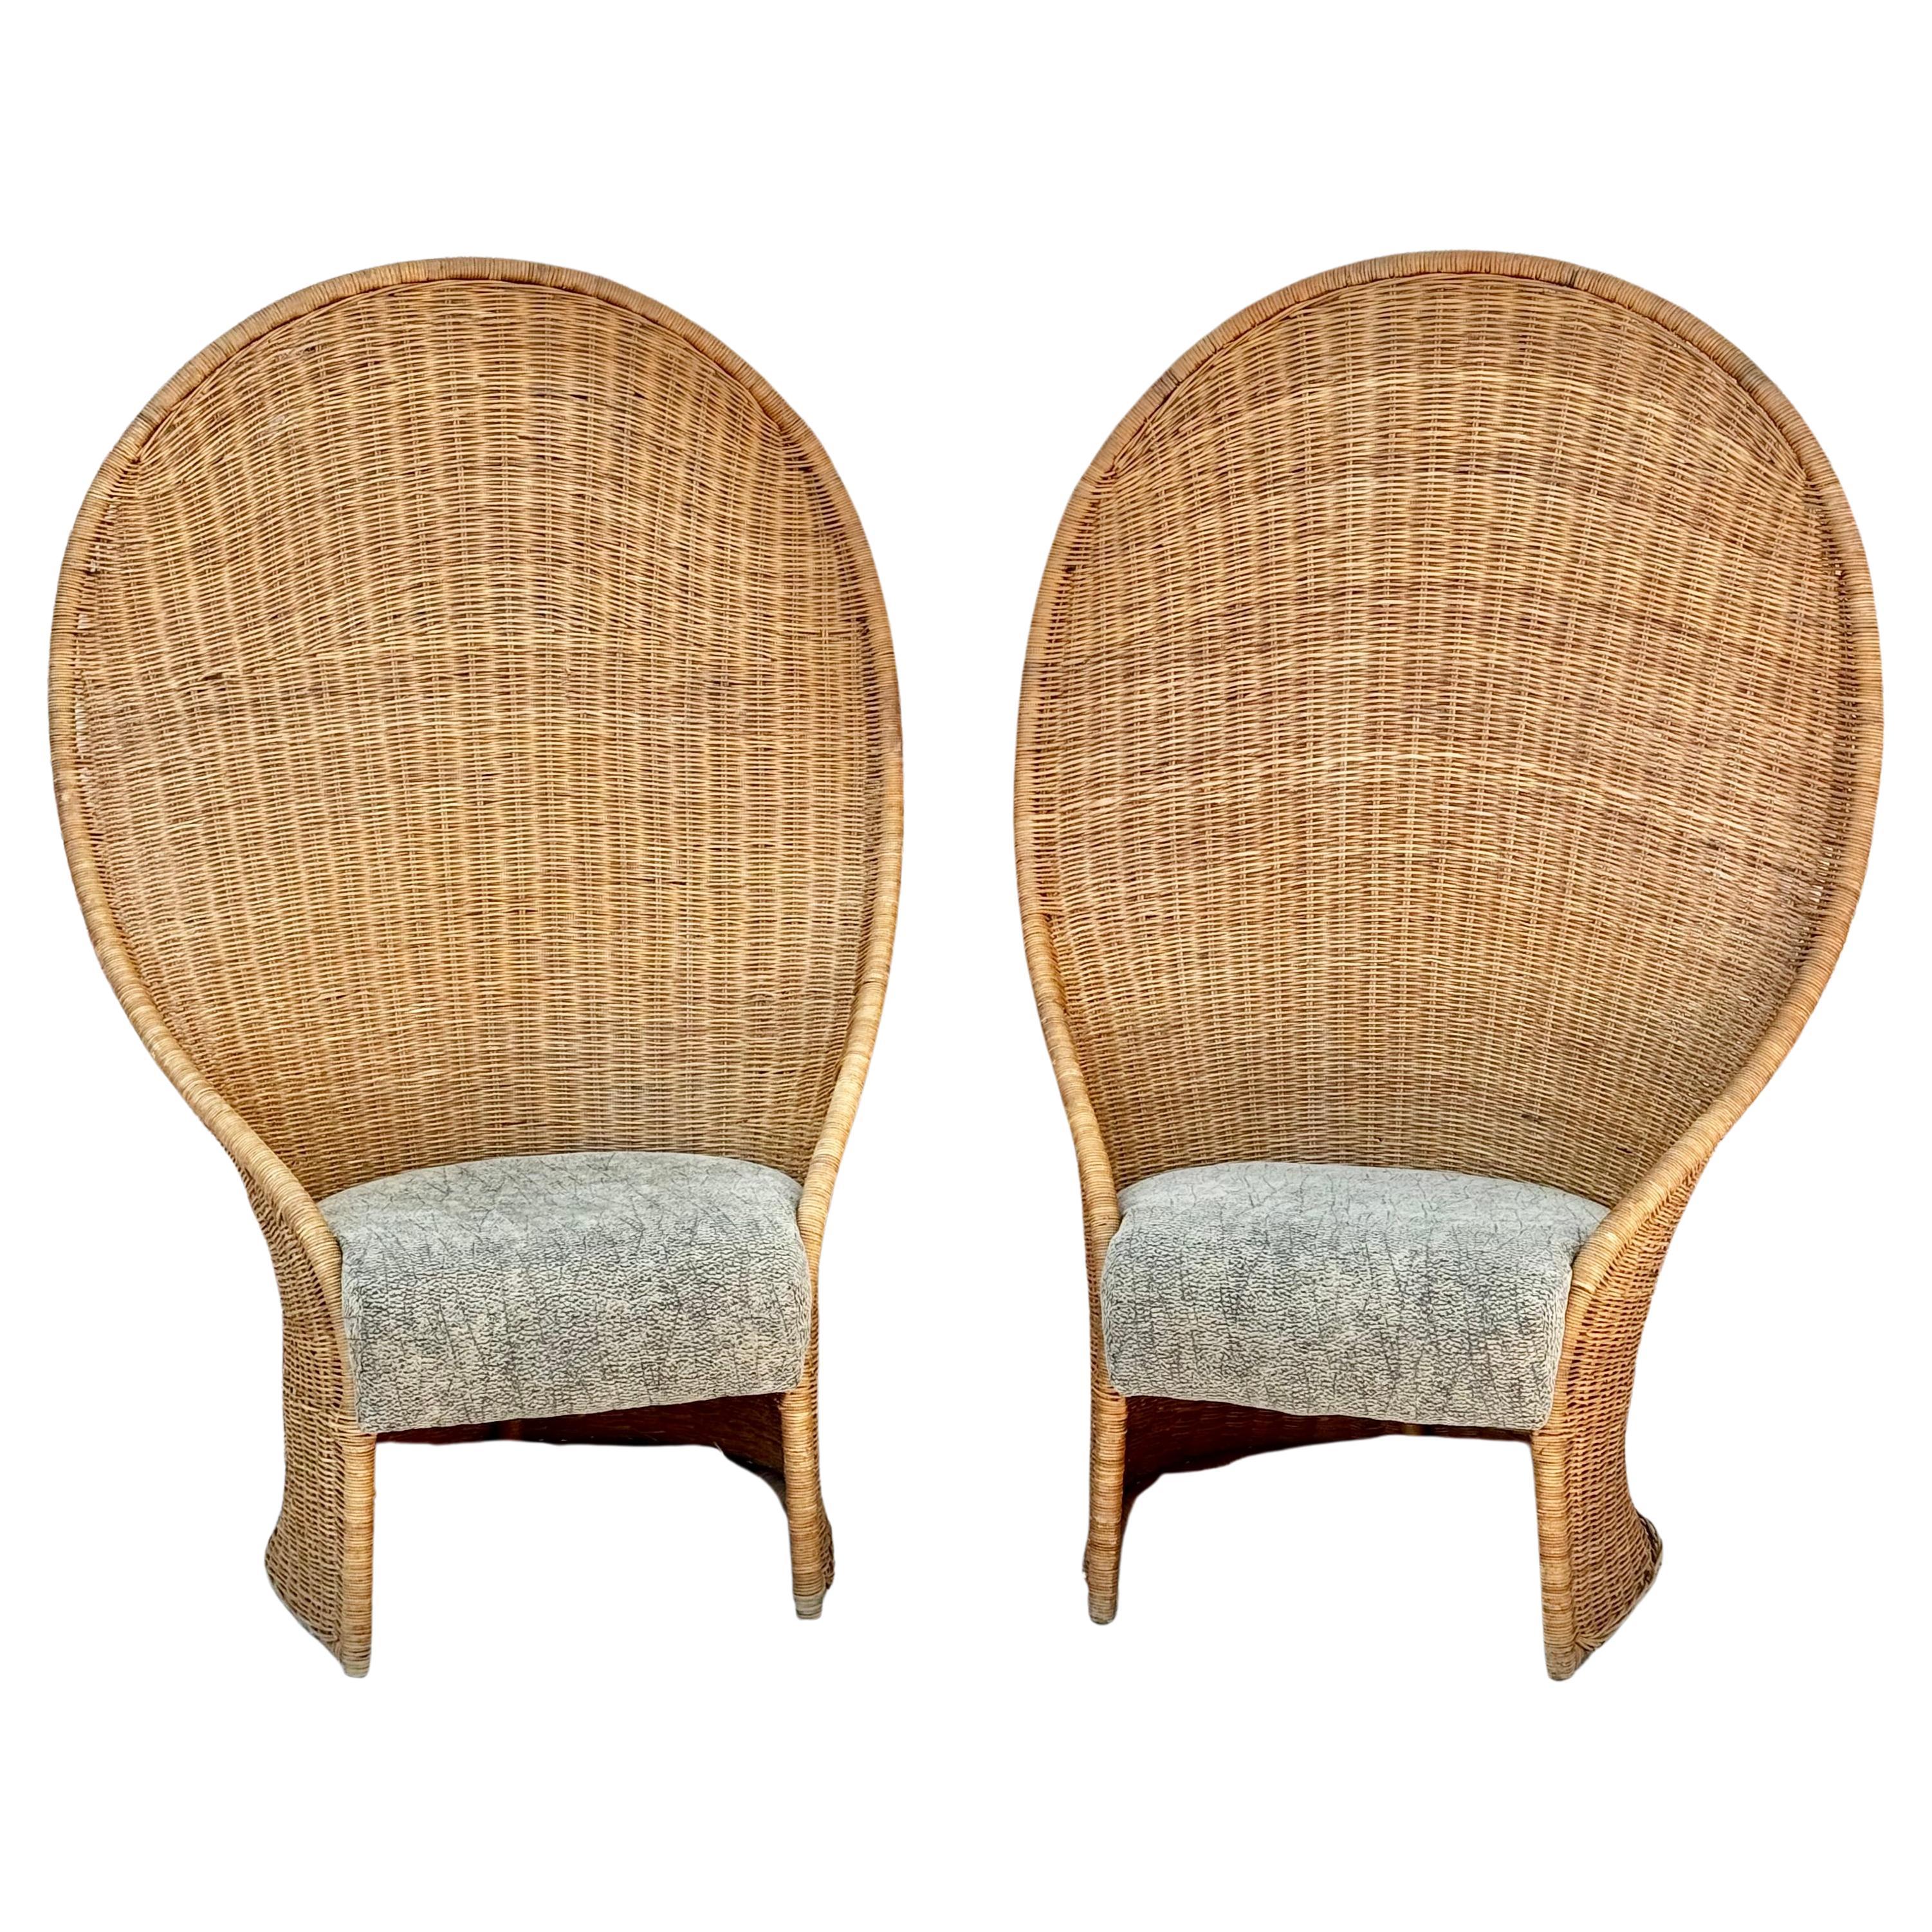 Pair Of Mid-Century Modern Tall Rattan Wicker Peacock Chairs For Sale